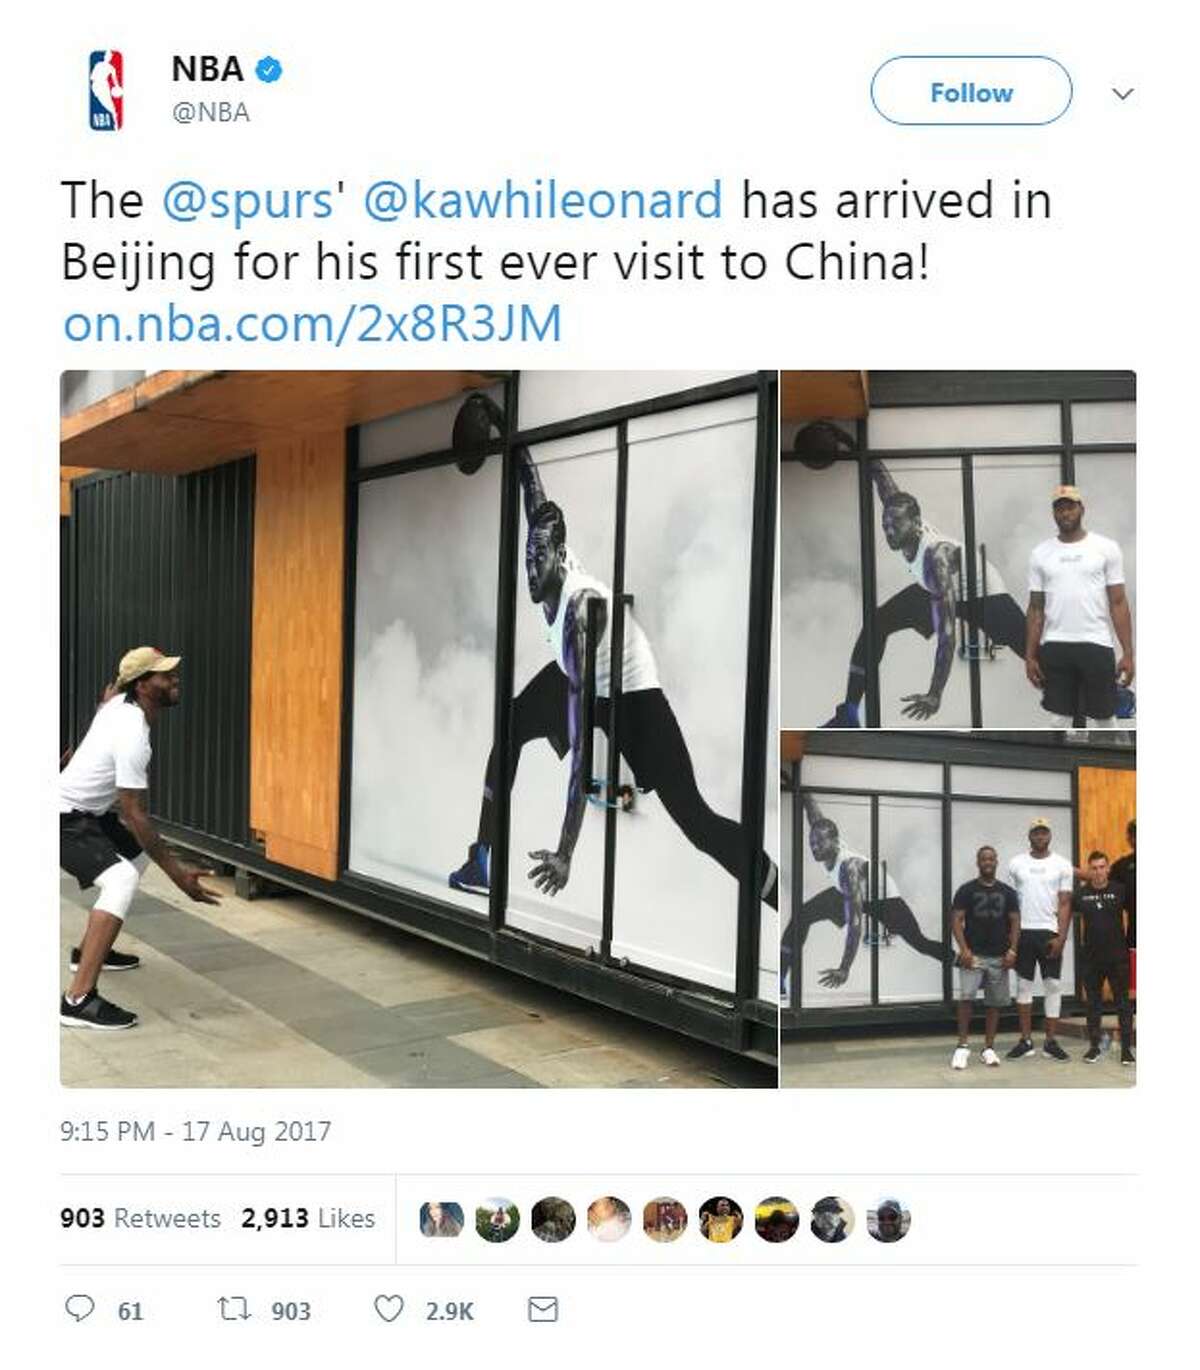 The NBA shared photos of the San Antonio Spurs' Kawhi Leonard visiting a mural of himself during his trip to Beijing. Keep clicking to find out what other Spurs players have been up to during the 2017 summer.